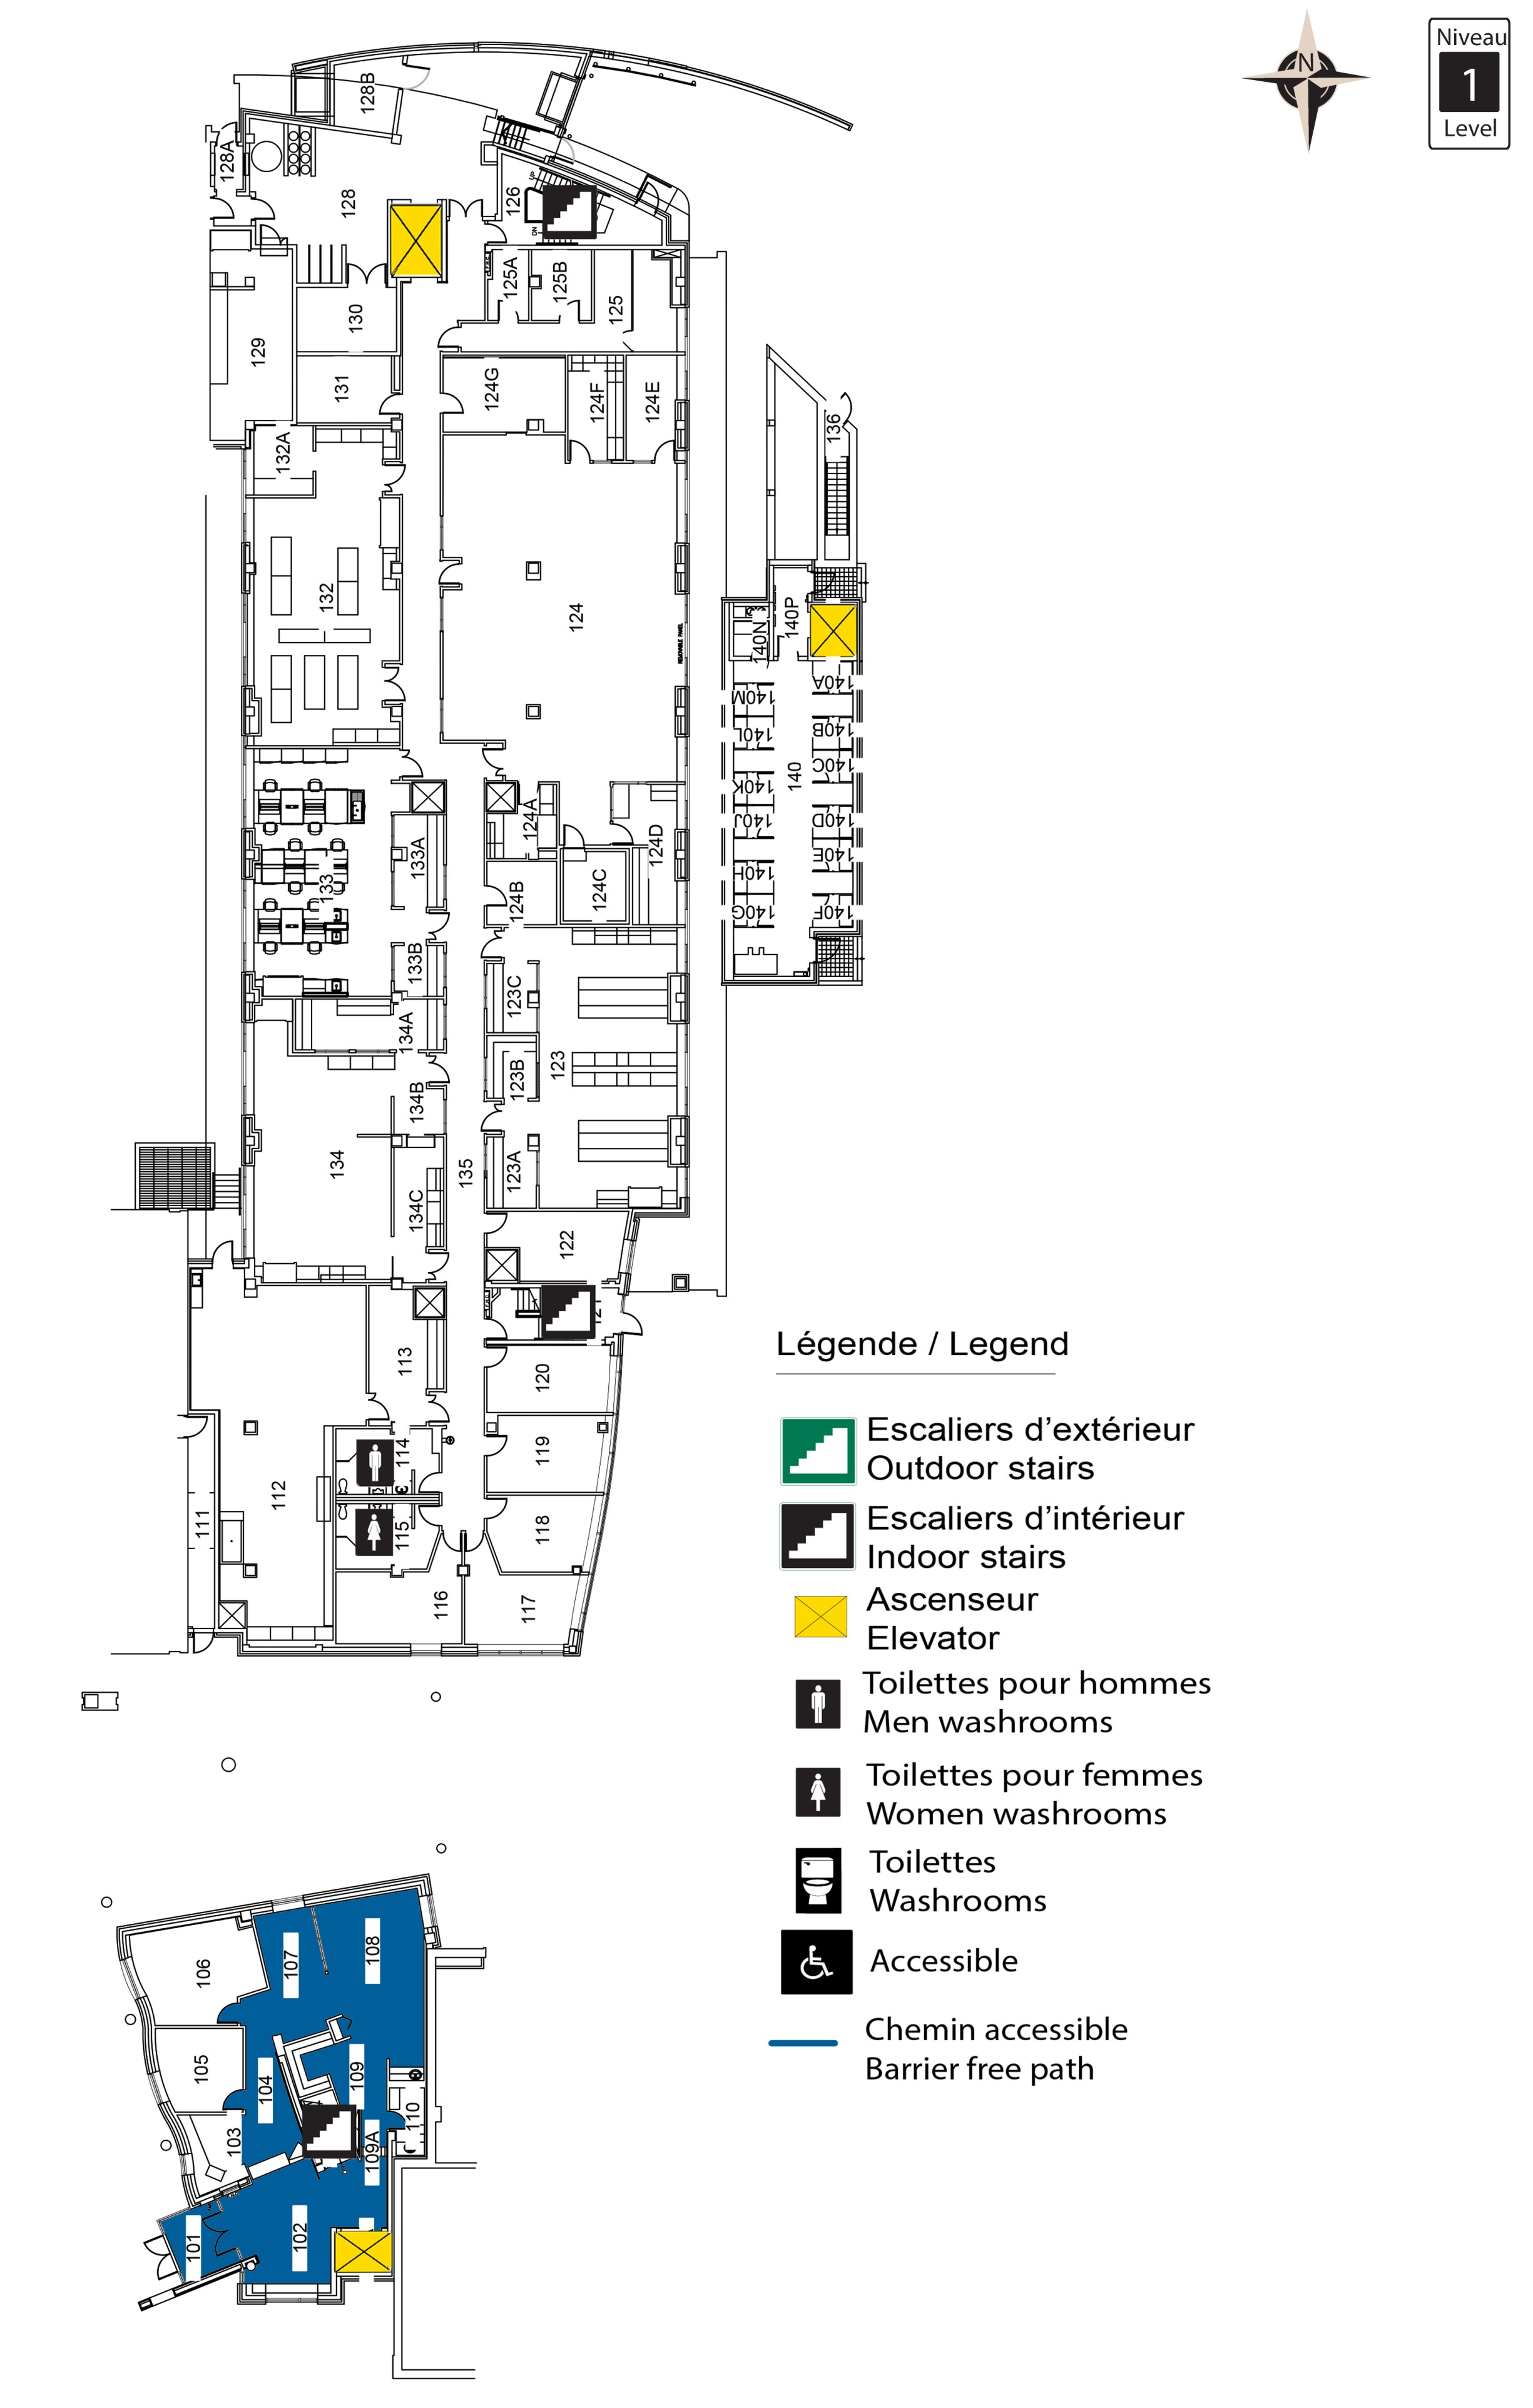 Accessible map of DRO Level 1